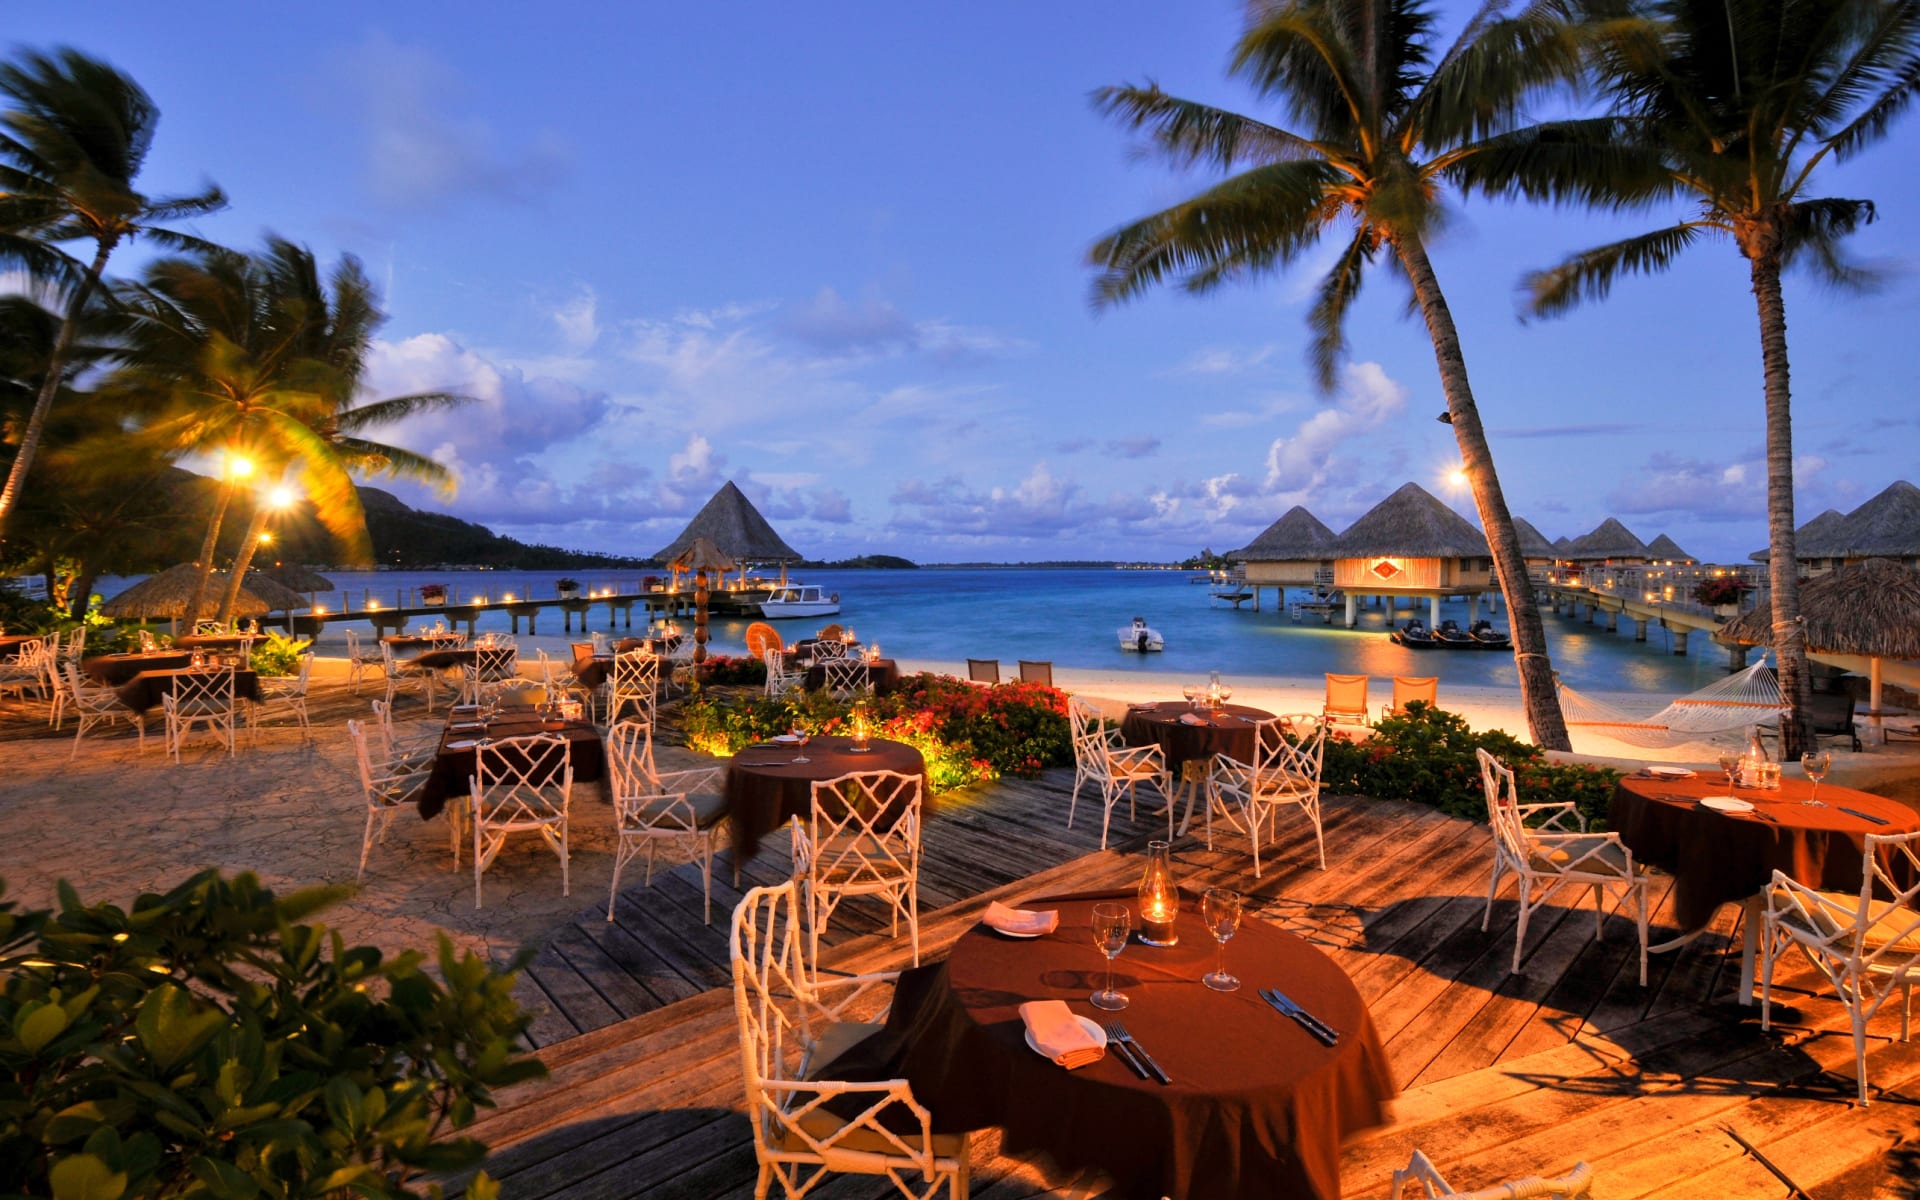 It's nighttime, and the dining tables overlook the beach and are backed by palm trees and lamps. 